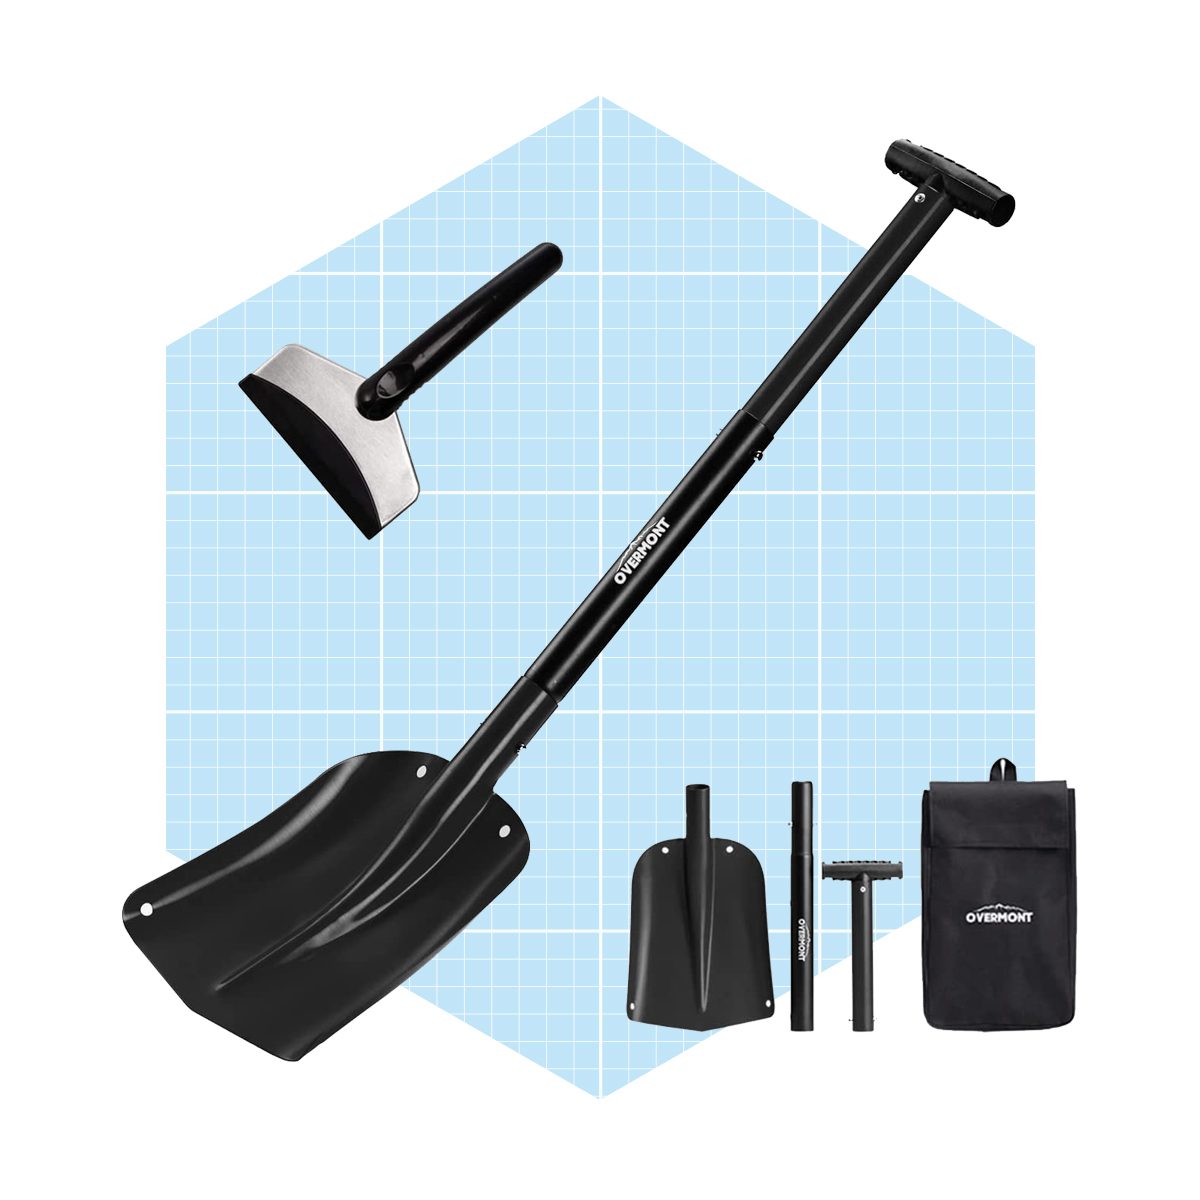 Overmont Collapsible Snow Utility Sport Shovel Aluminum Lightweight With Ice Scraper And Carrying Bag Ecomm Amazon.com